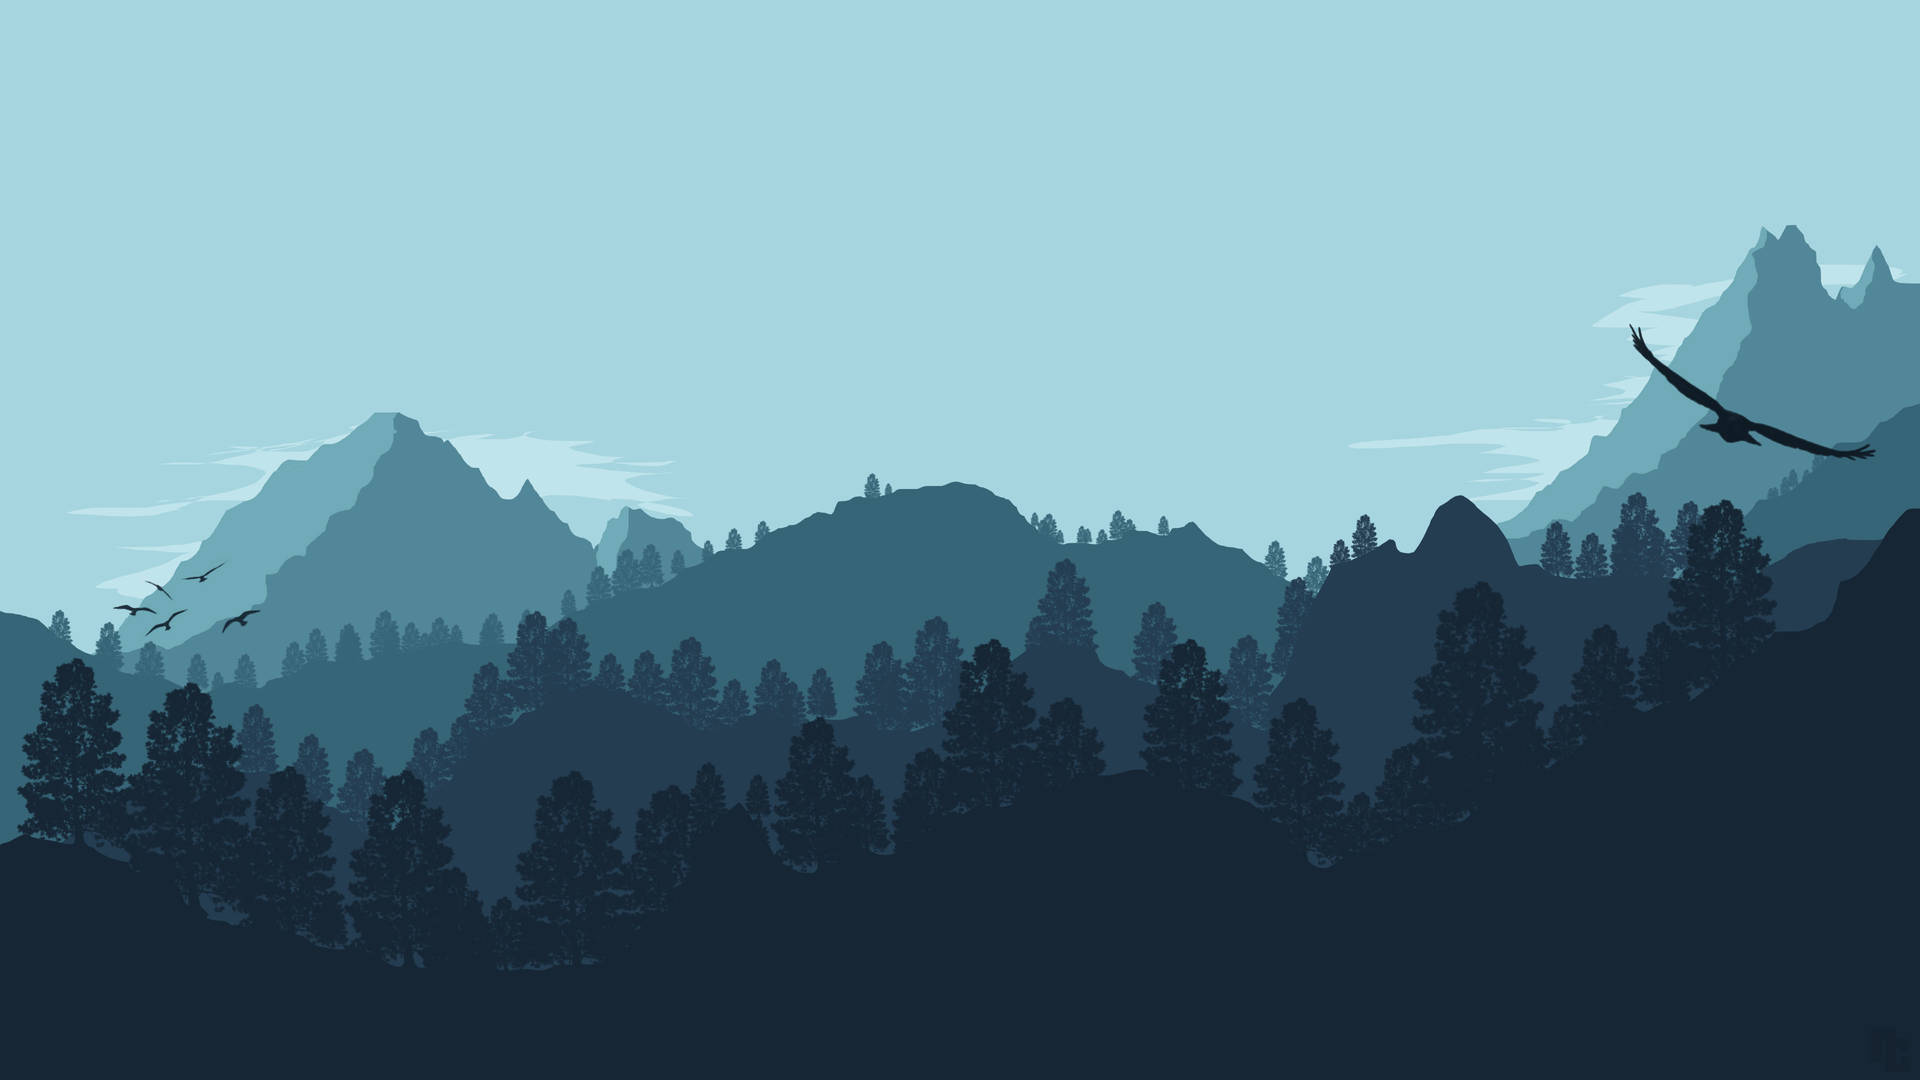 Simple Clean Teal Forest Art